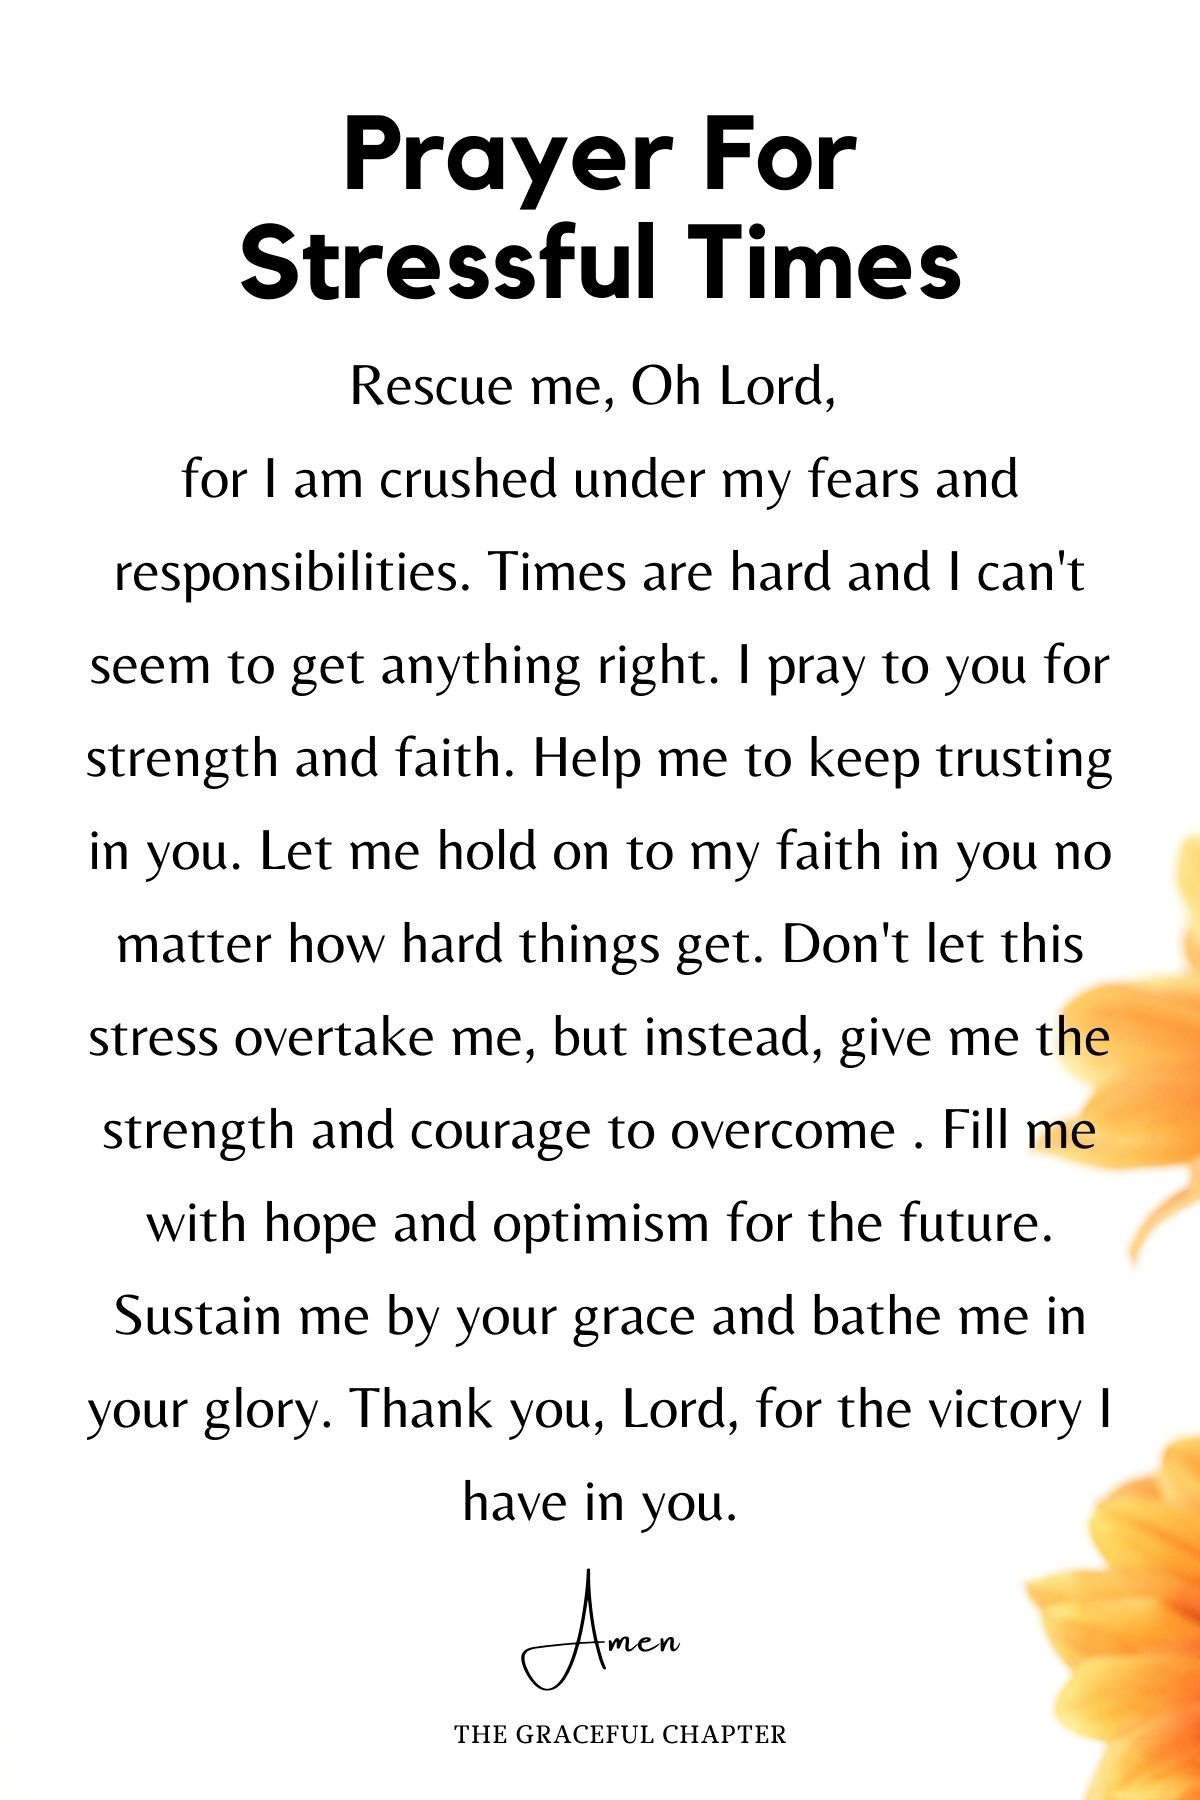 Prayer for stressful times